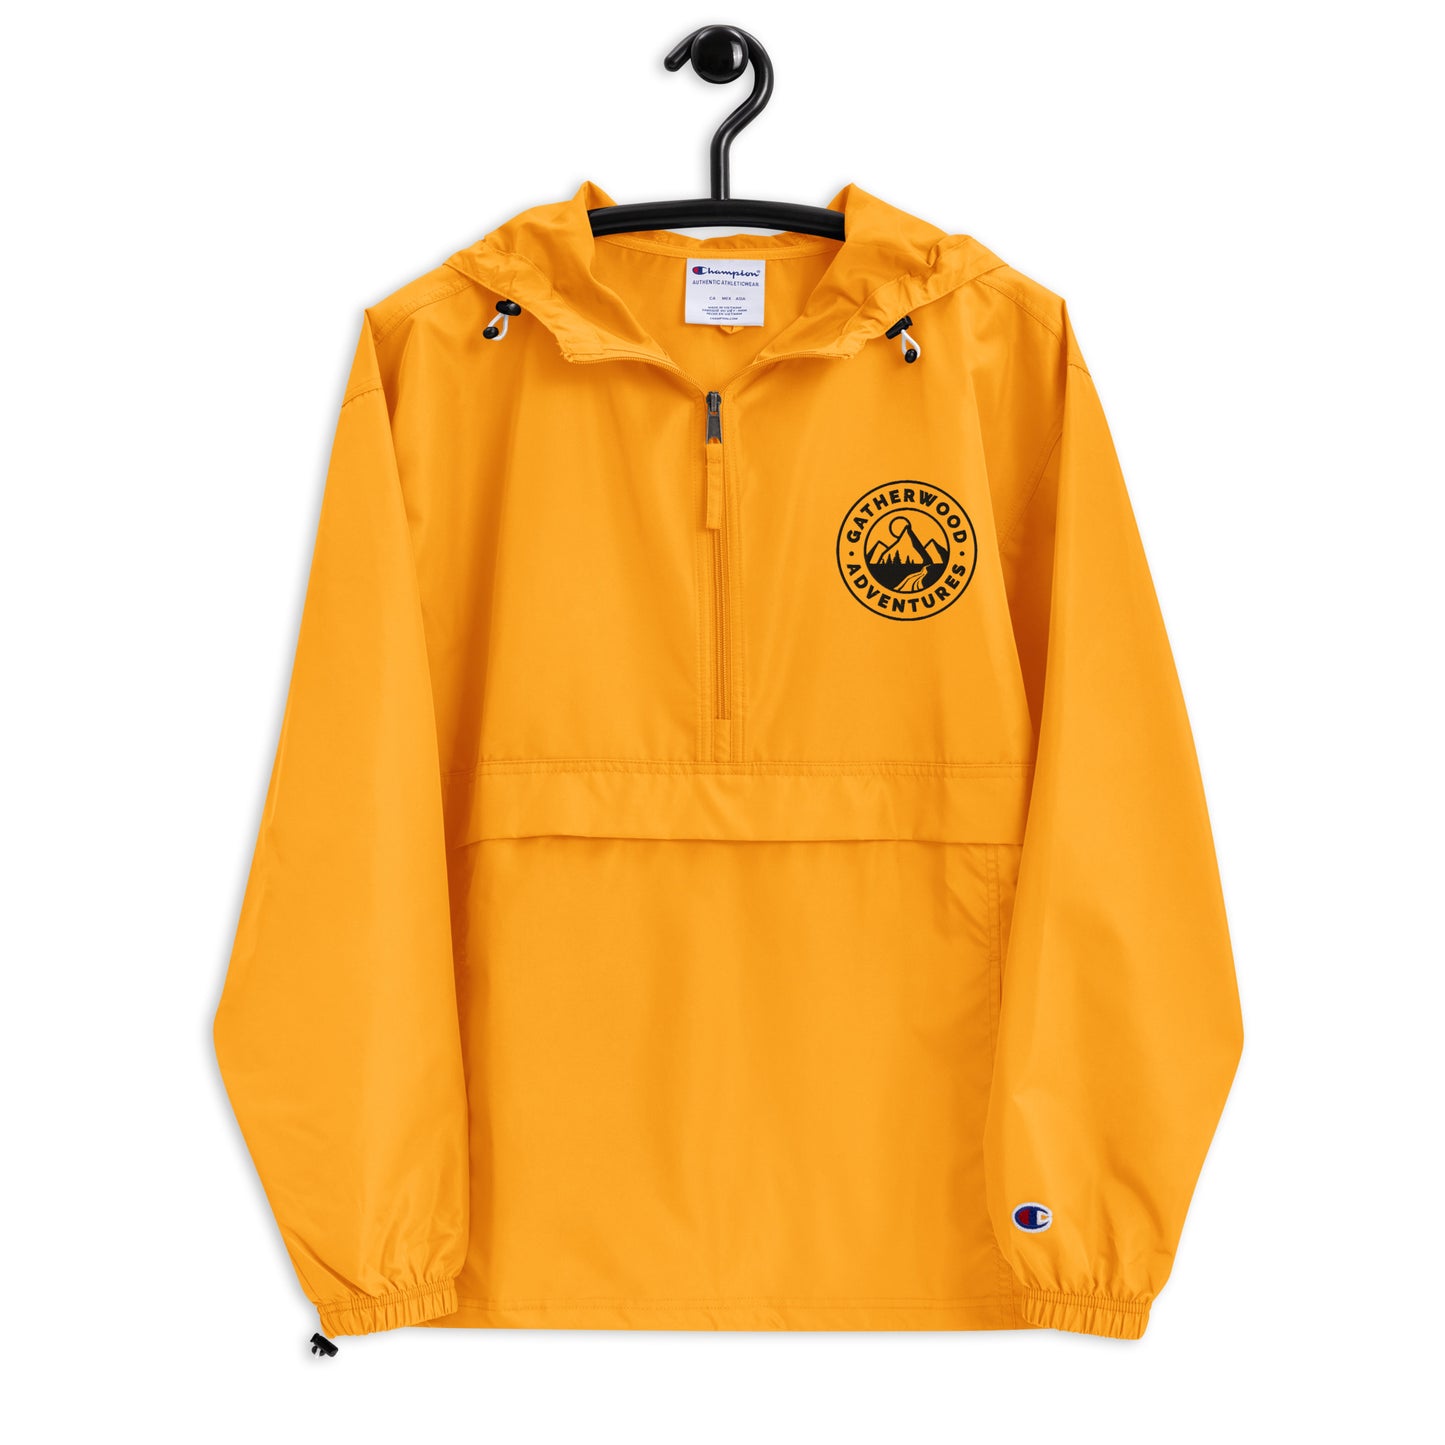 Gatherwood Adventures Embroidered Champion Packable Jacket